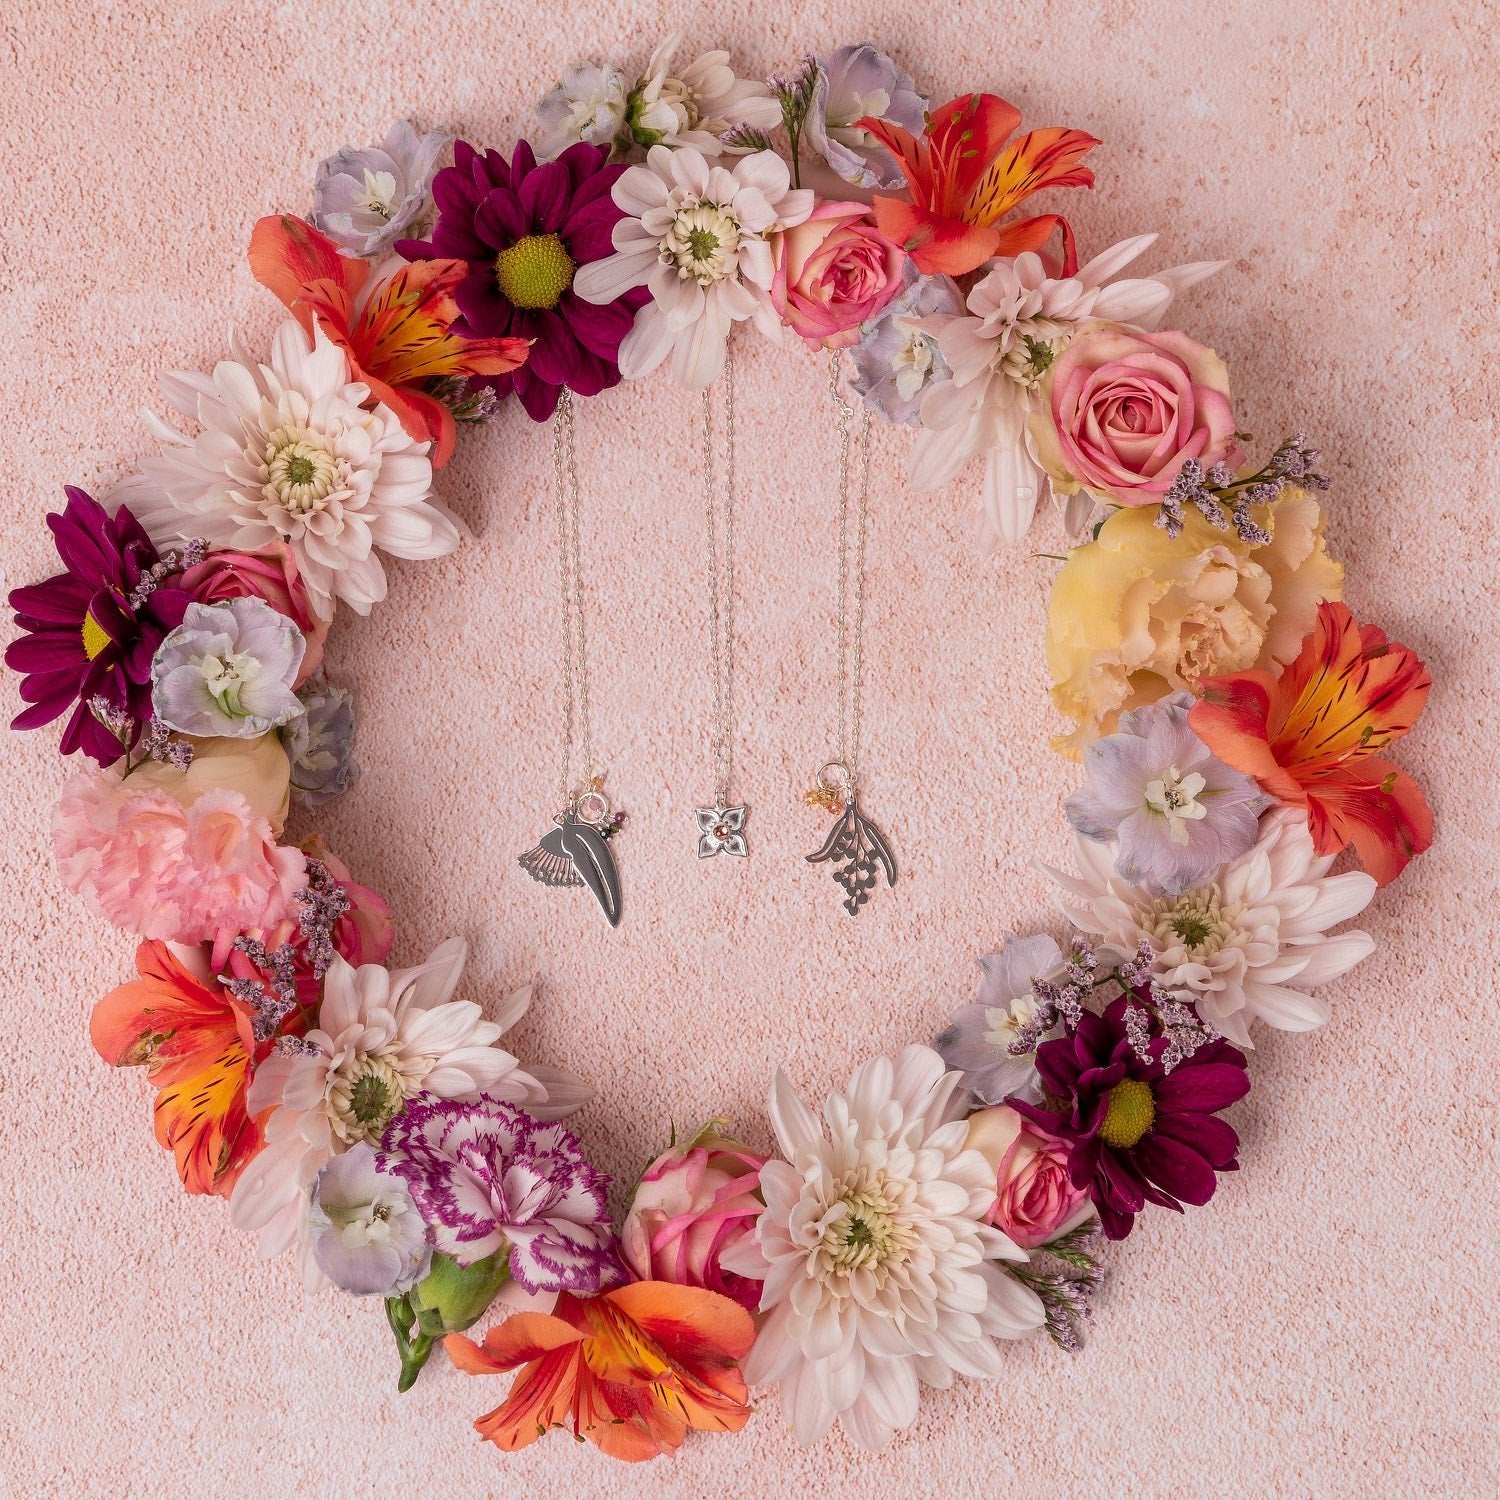 How to choose great gifts for Mother's Day (and beyond!) - Simone Walsh Jewellery